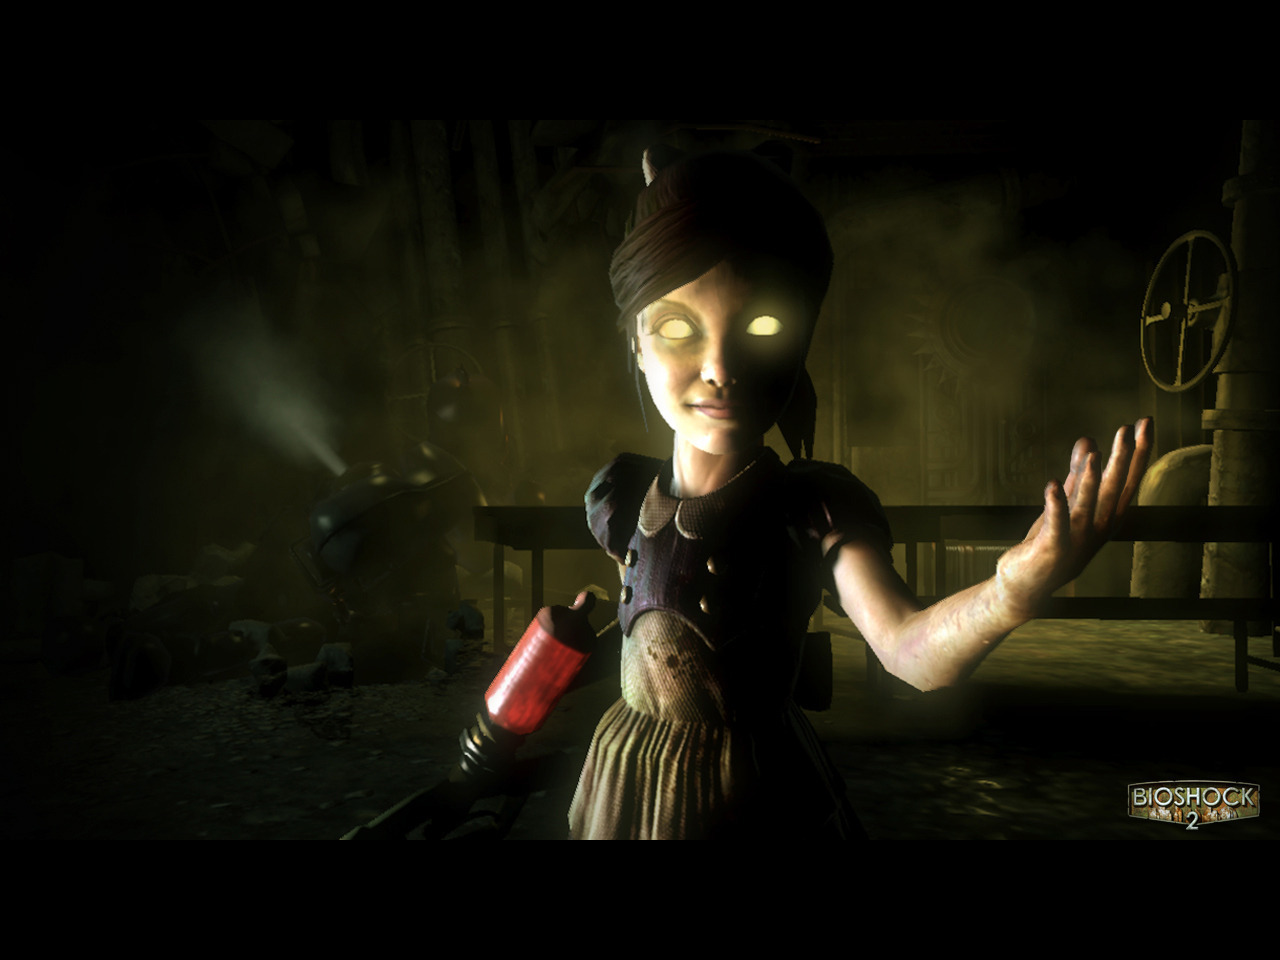 Funkyrach01 Image Bioshock HD Wallpaper And Background Photos